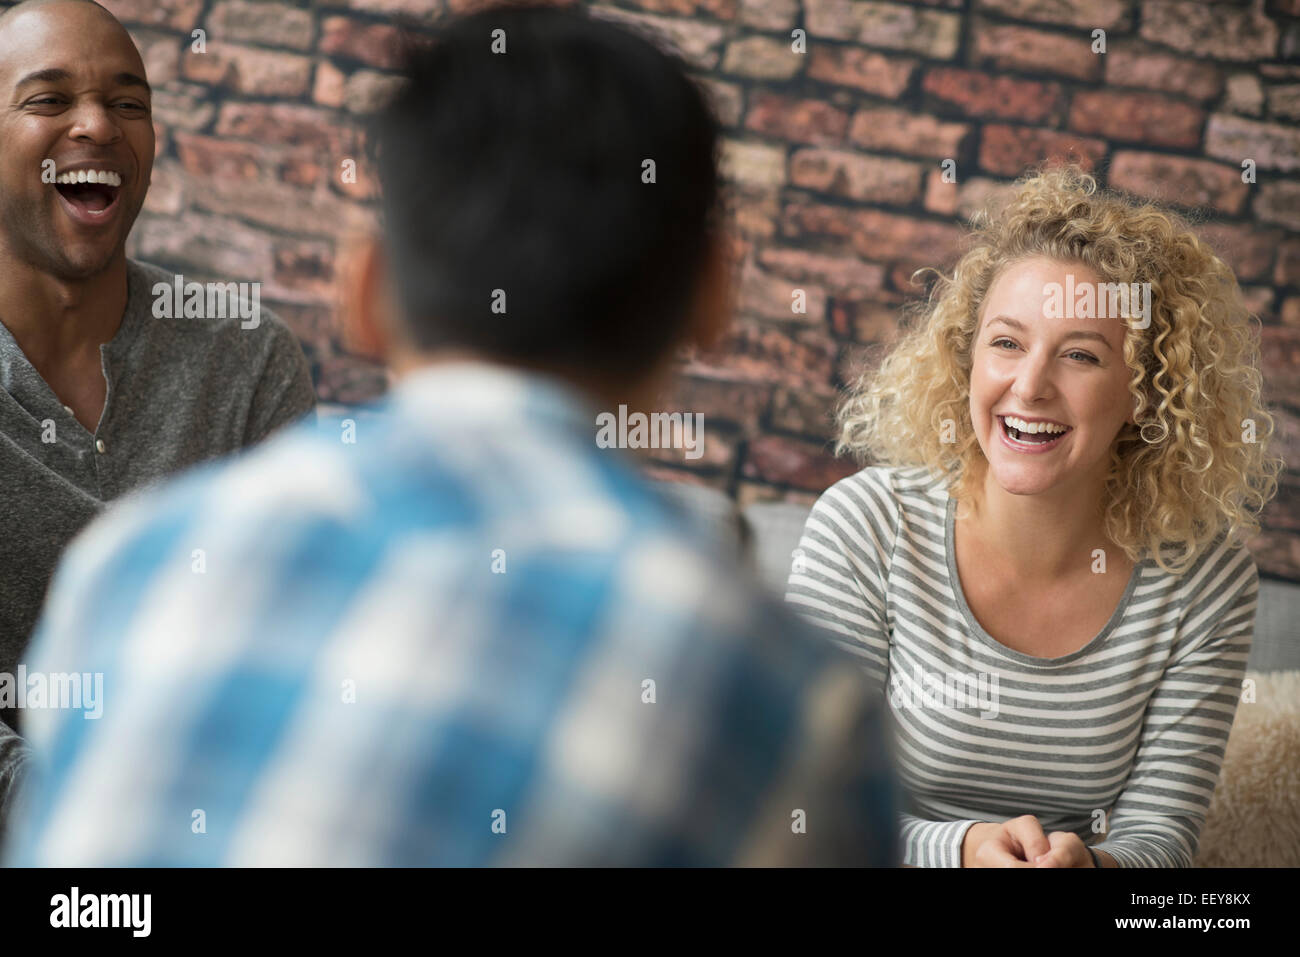 Friends laughing together Stock Photo